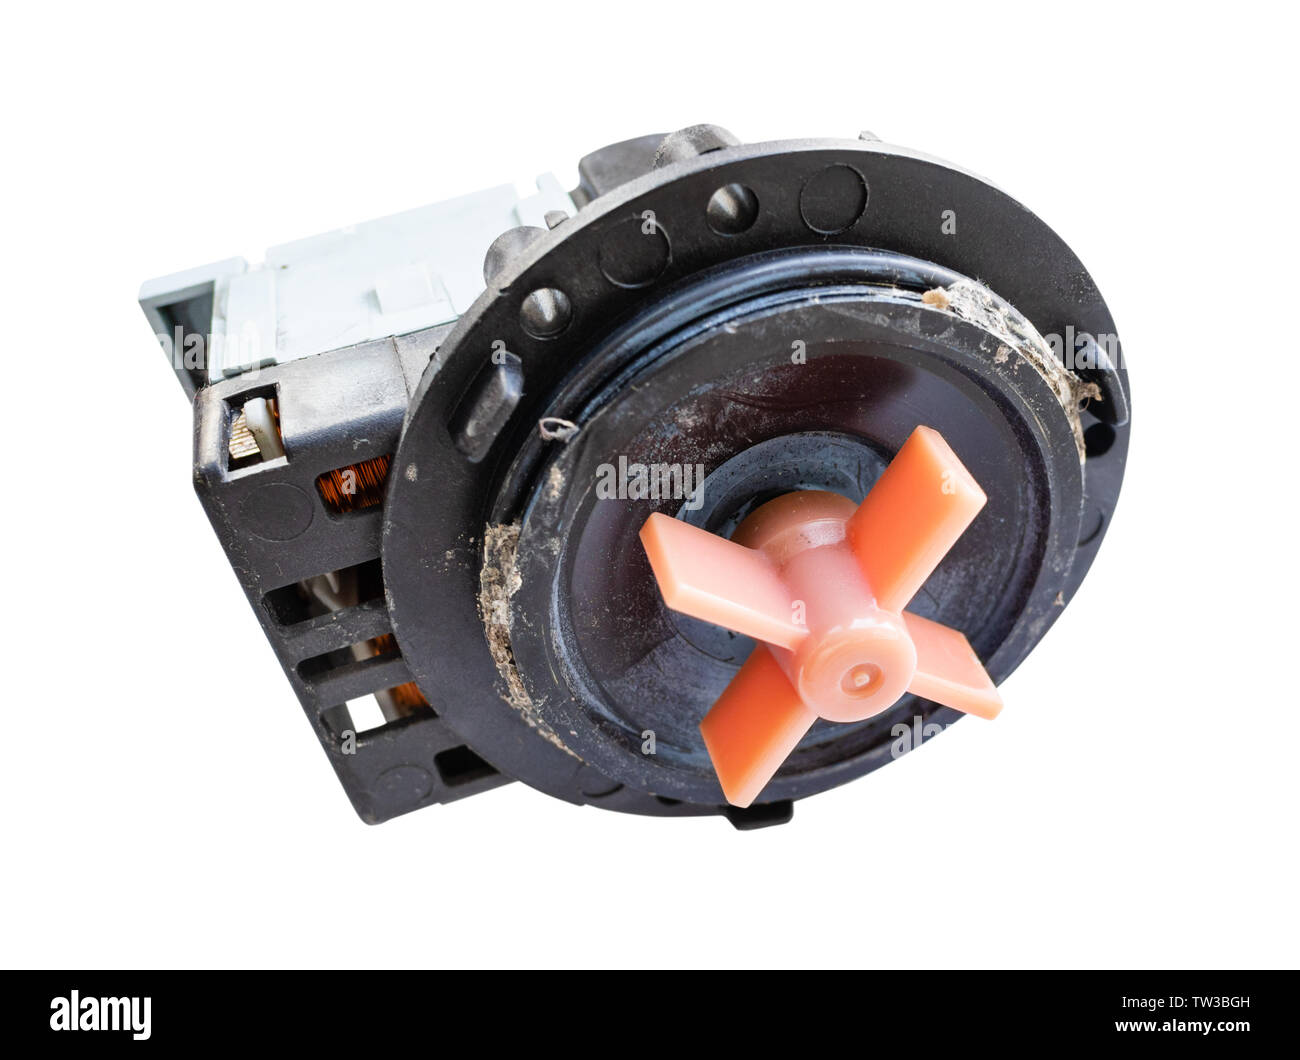 malfunctioning water pump motor of old washing machine cut out on white background Stock Photo